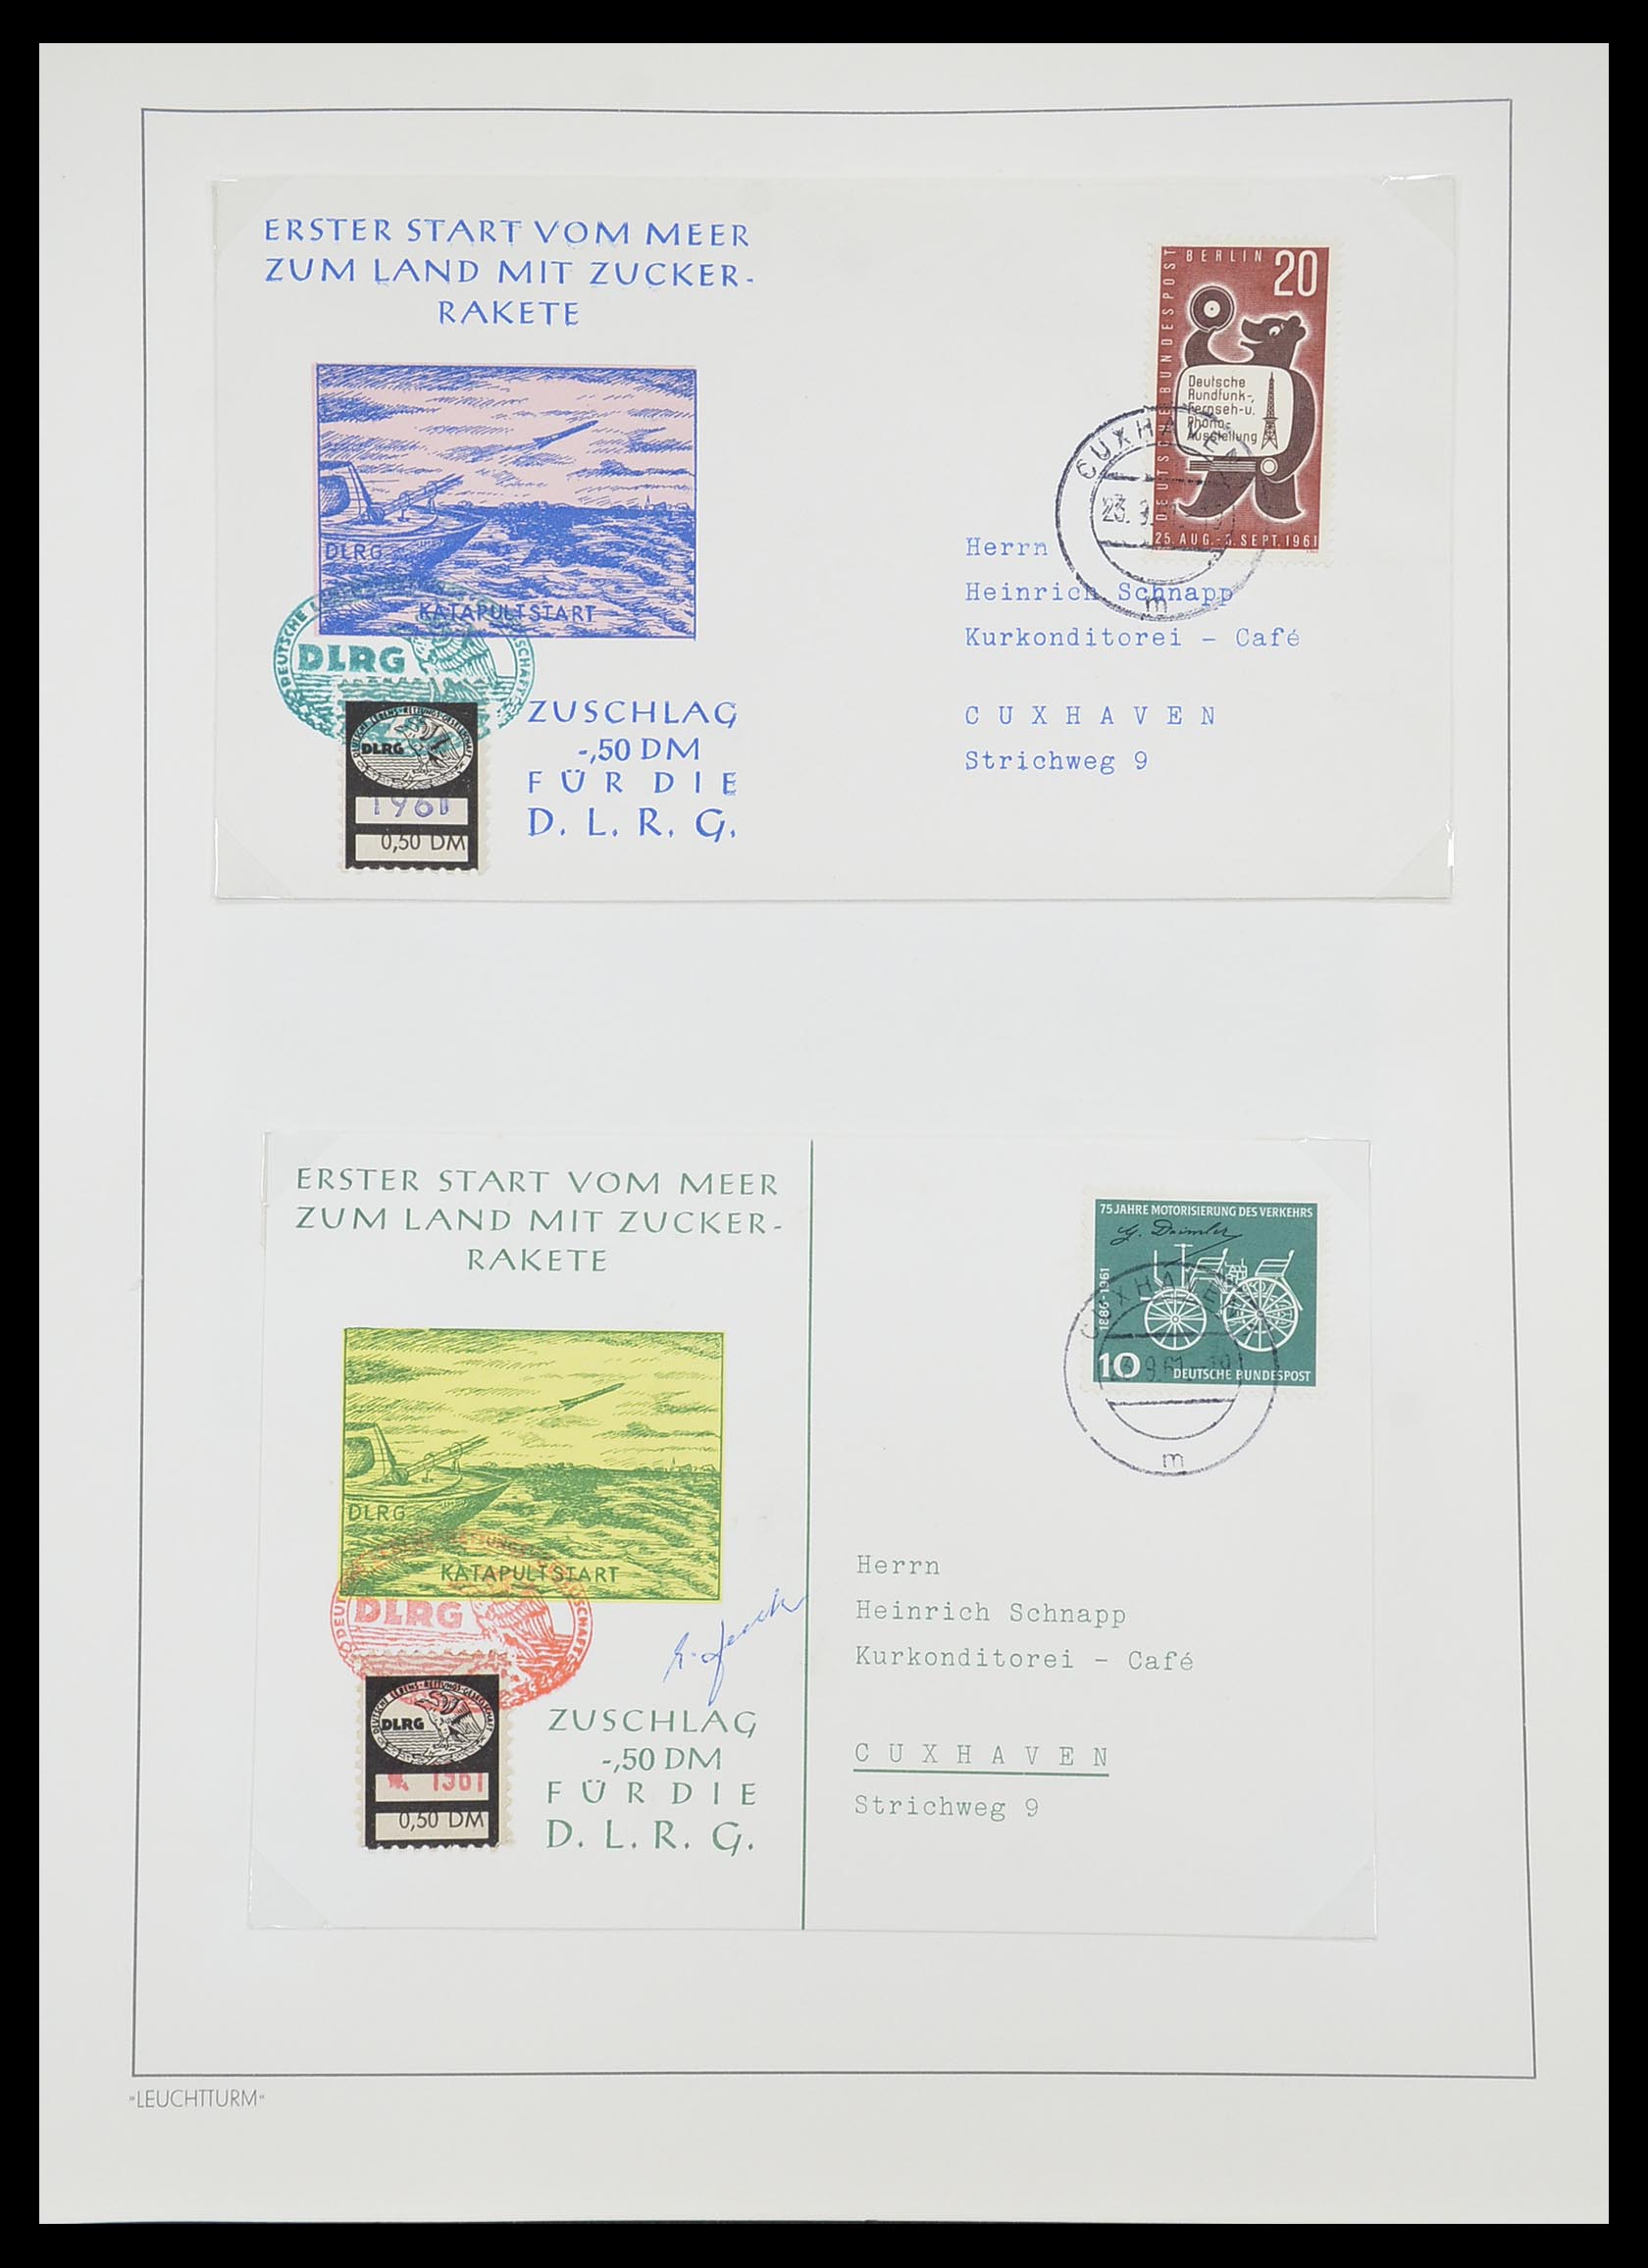 33463 109 - Stamp collection 33463 Rocket mail covers.